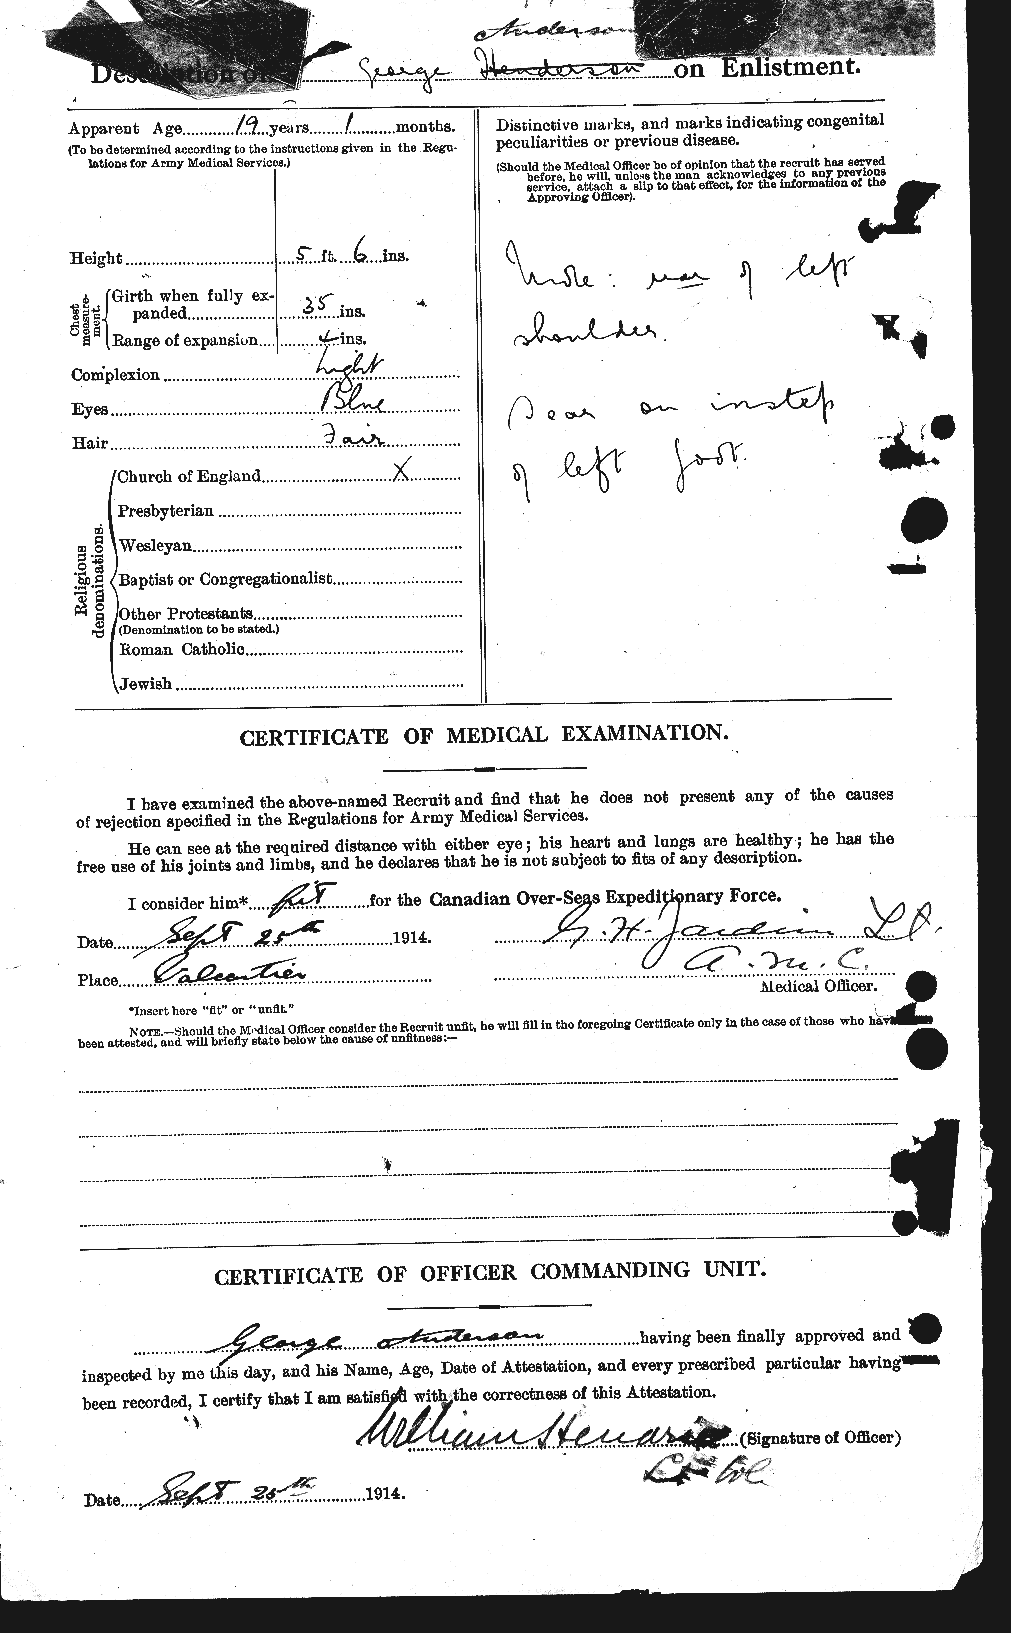 Personnel Records of the First World War - CEF 209765b